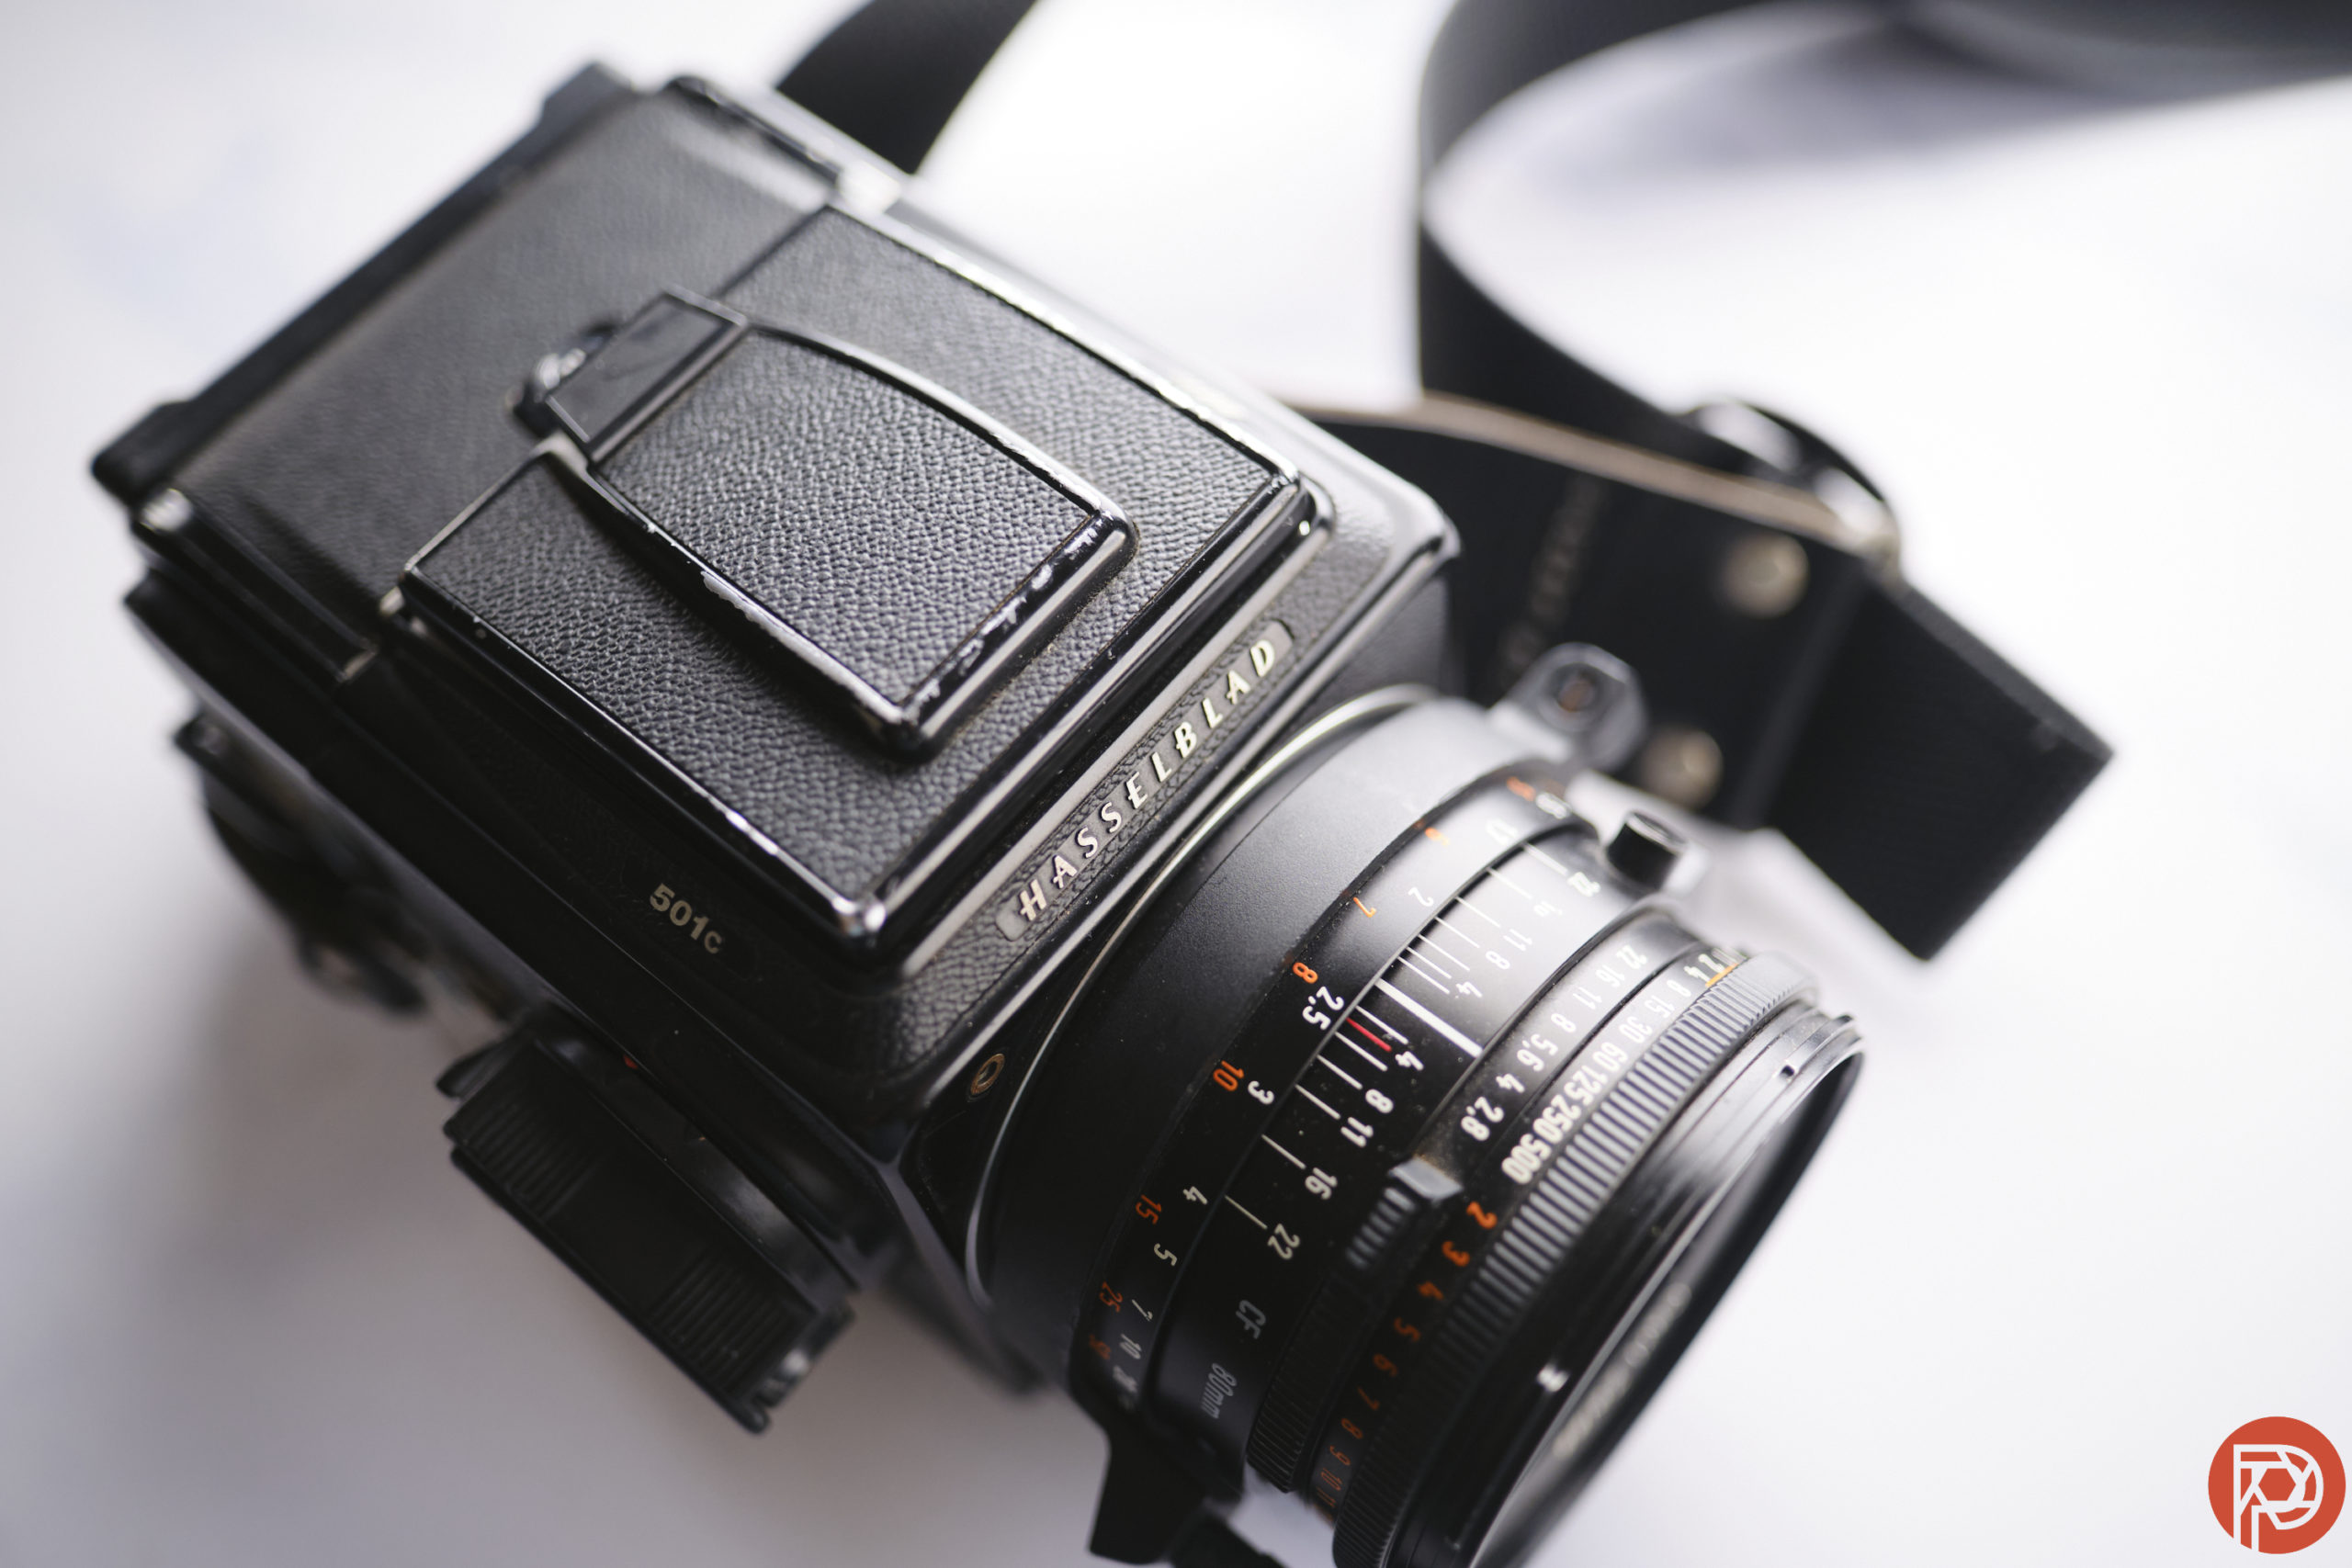 Chris Gampat The Phoblographer Hasselblad 501C review product images 1.41-250s400 1